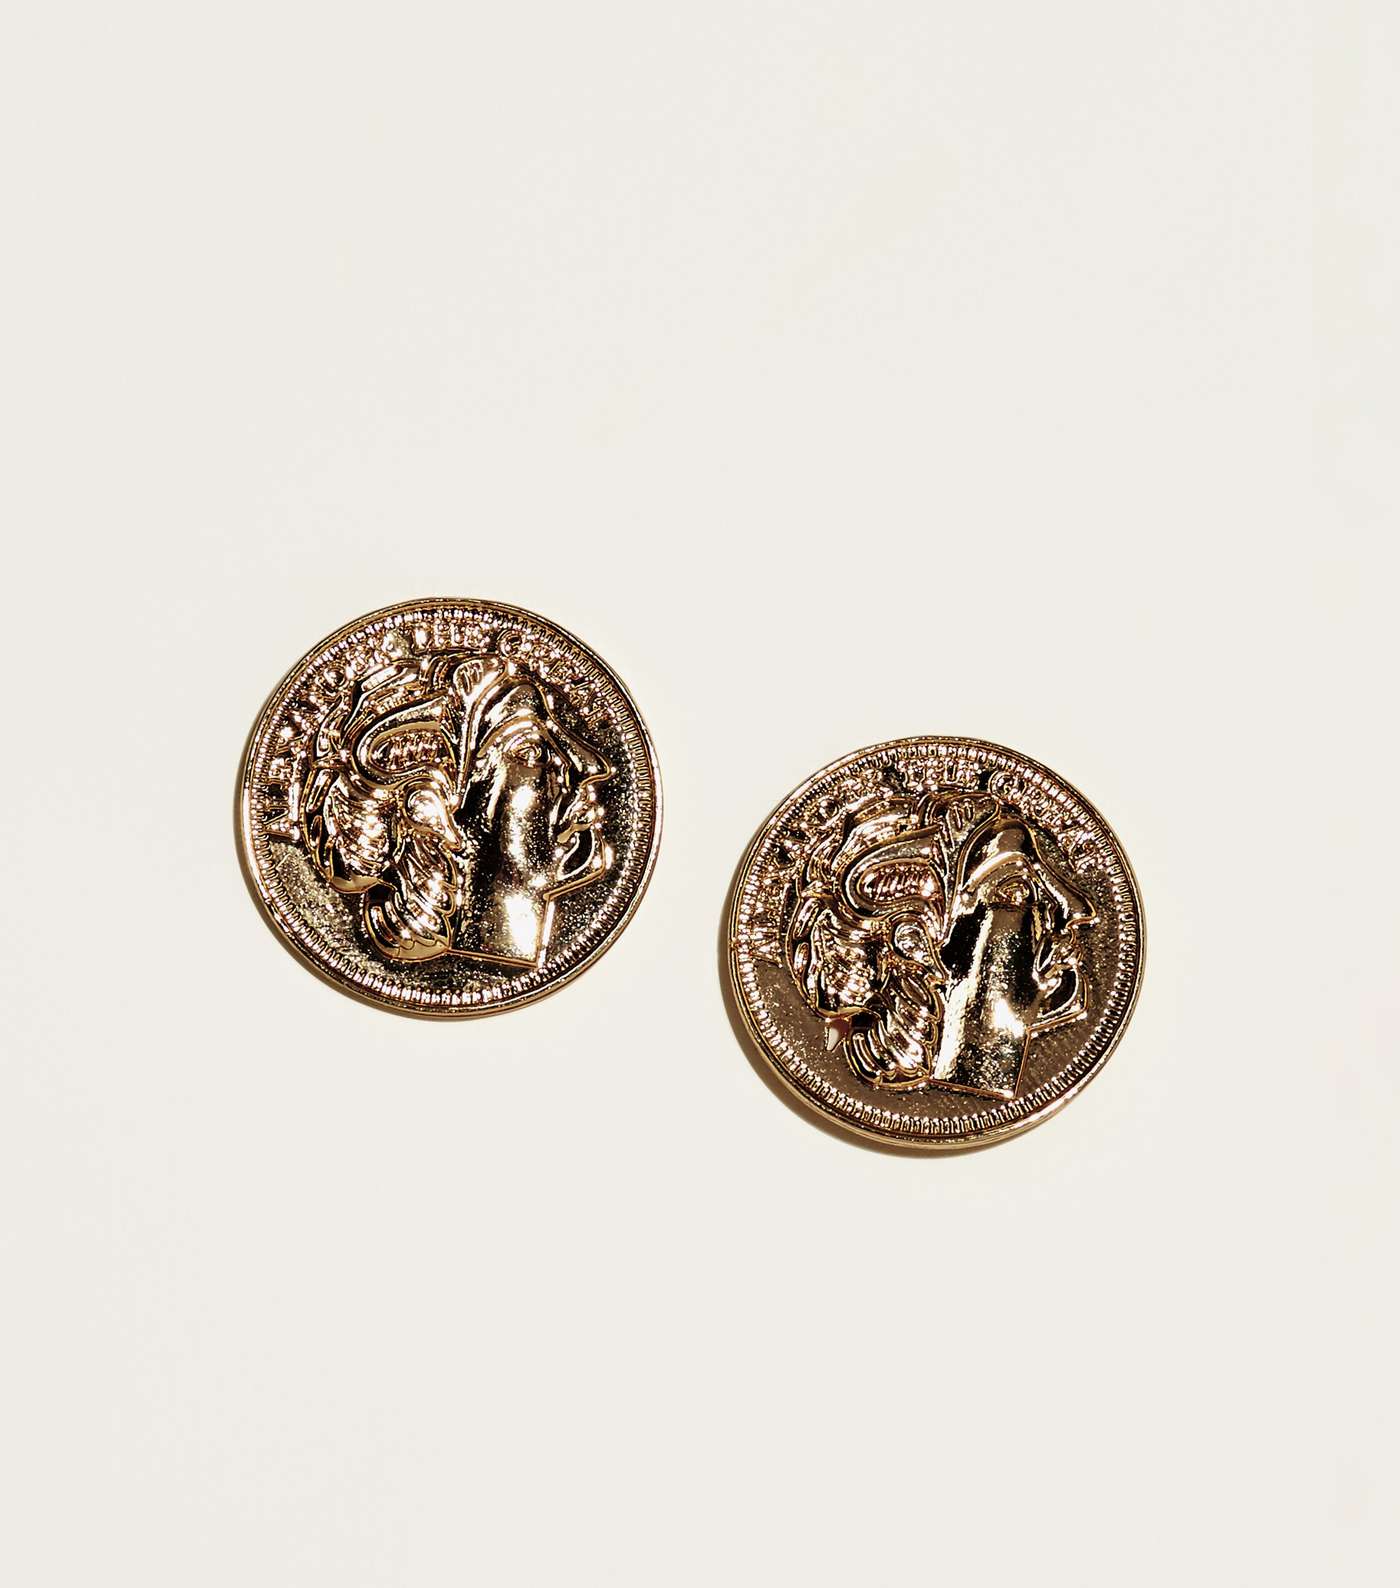 Gold Coin Stud Earrings